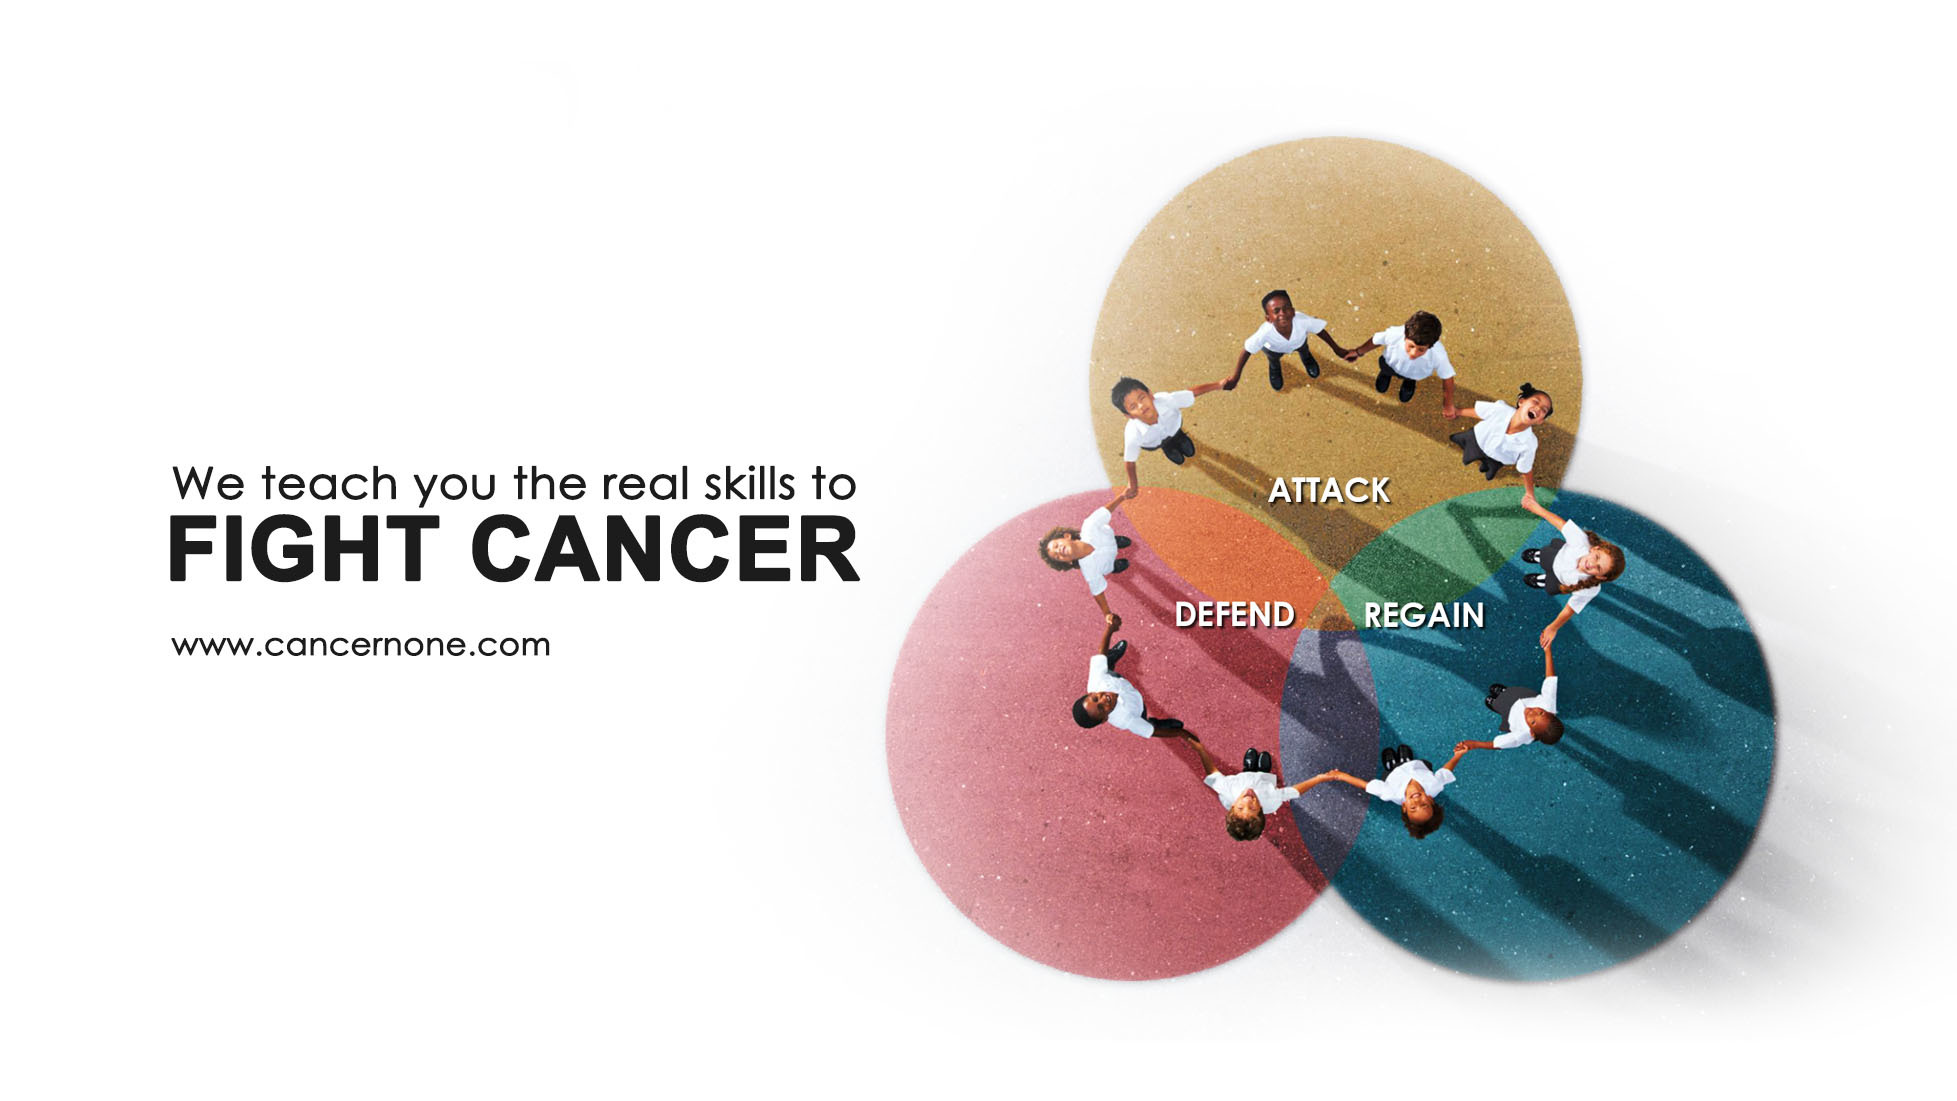 Cancernone Launches Cutting-Edge Parapsychotherapy + Technologies© Treatments and Therapies To Treat Cancer Patients At Reasonable Price In Singapore